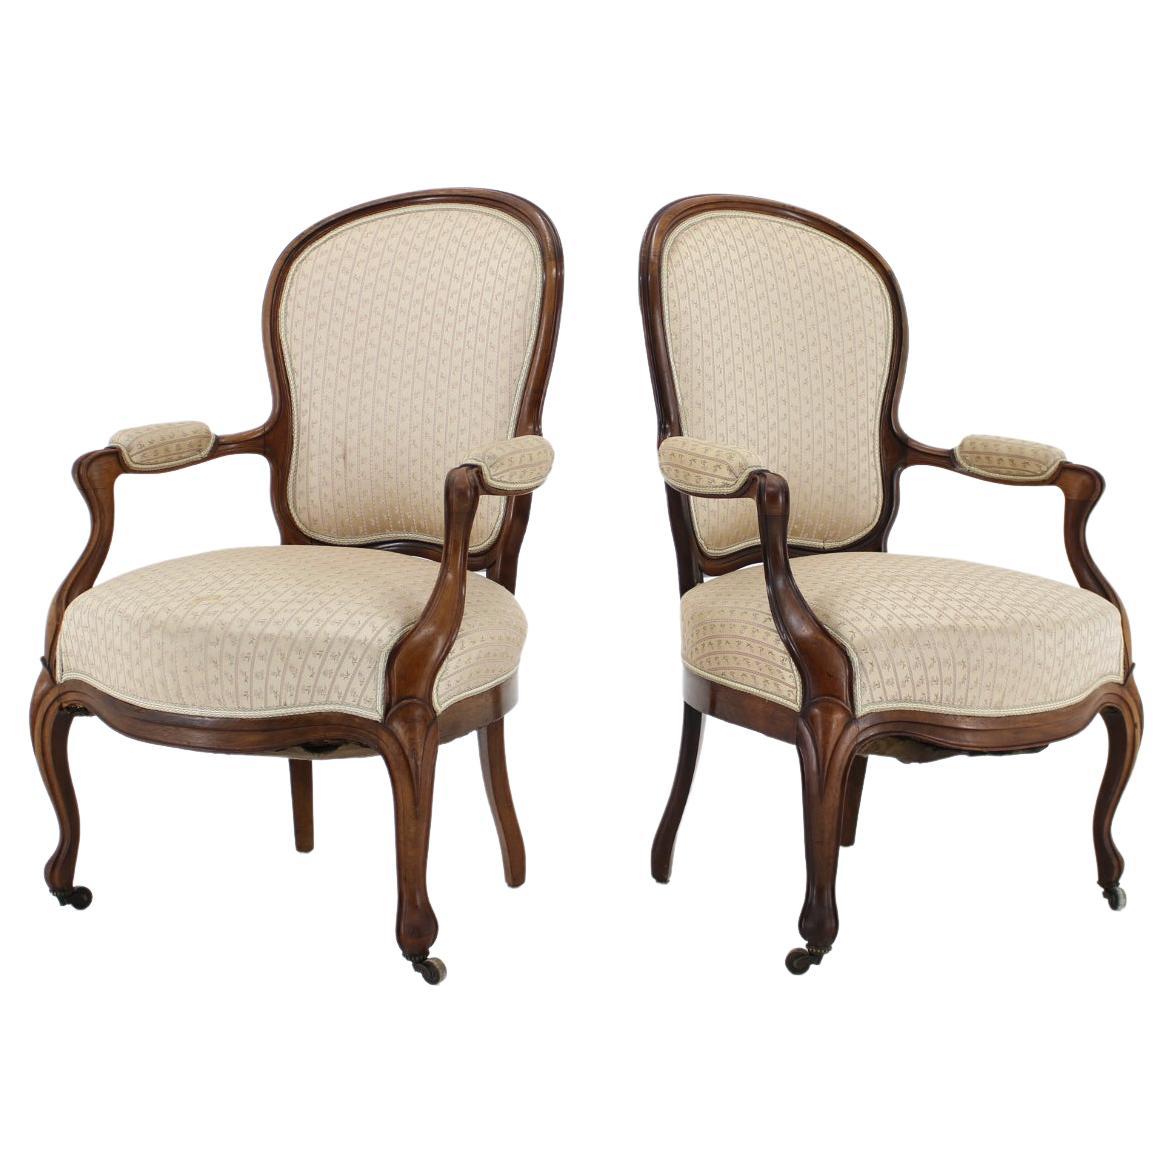 1900s Pair of Original Danish Rococo Chairs For Sale